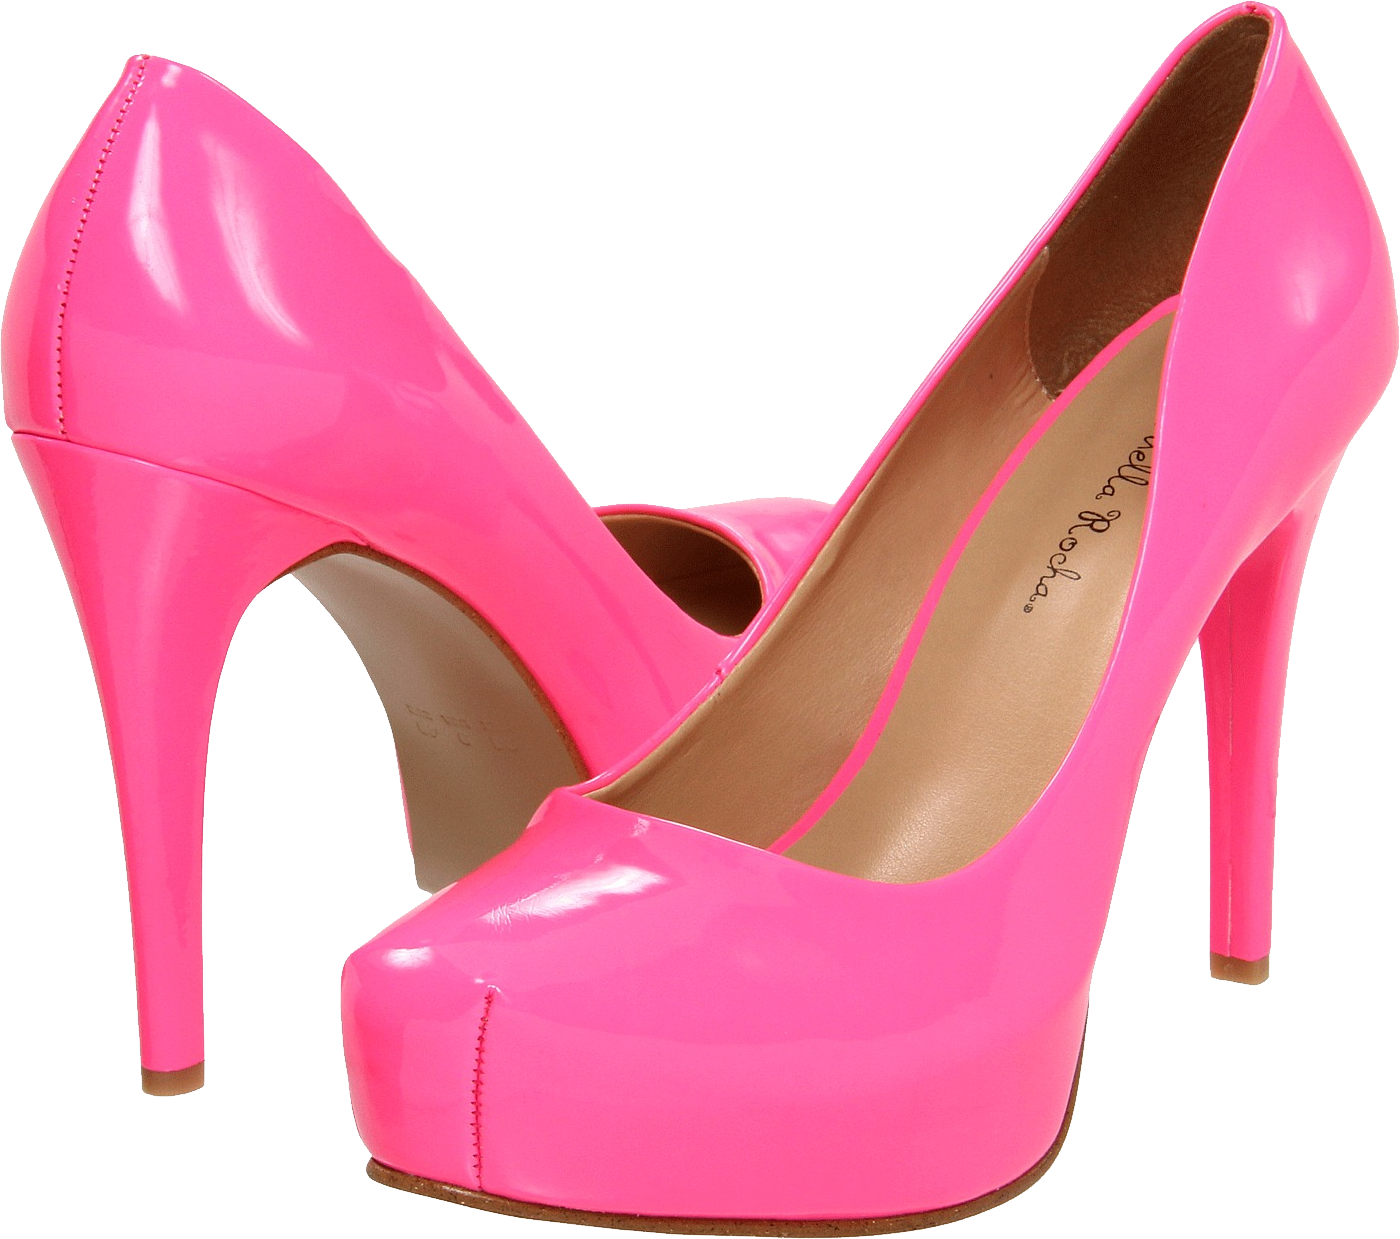 Chaussures femme roses